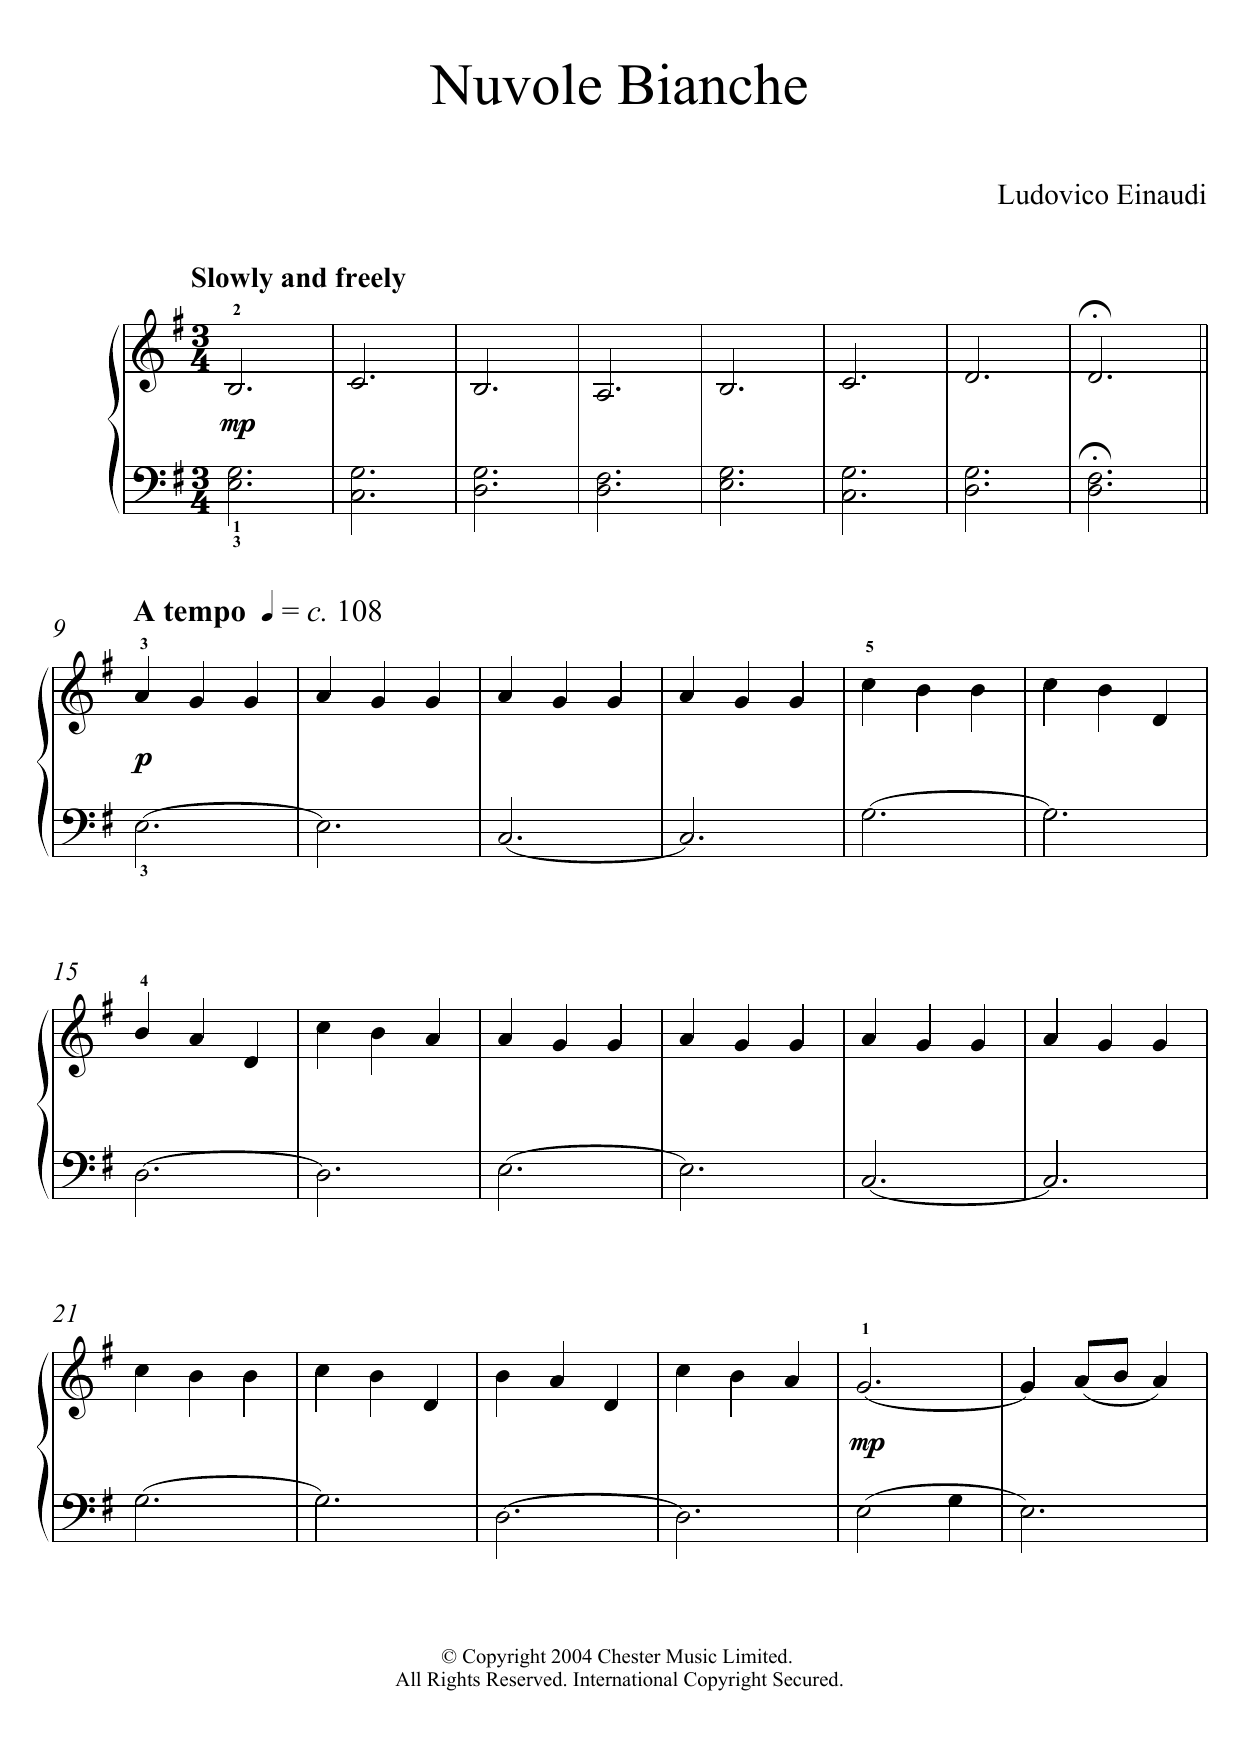 Nuvole Bianche Sheet Music By Ludovico Einaudi For Solo Noteflight Marketplace I'm going to play this beautiful song that makes me shudder every time i listen. nuvole bianche